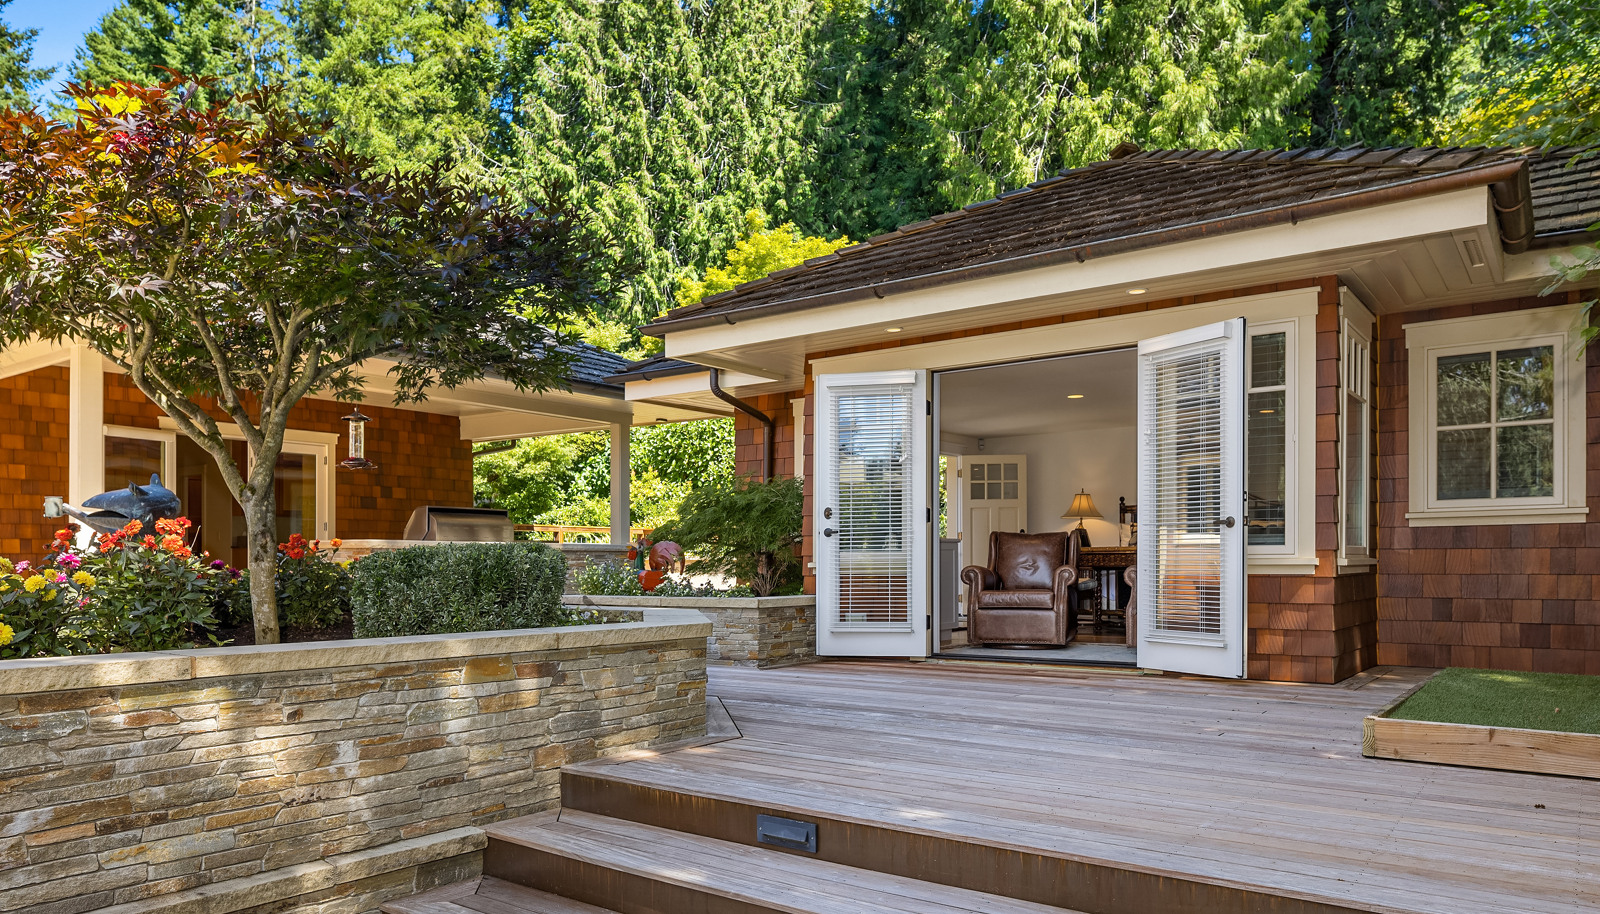 The 444sf, private, romantic guest cottage with French doors to the deck. 